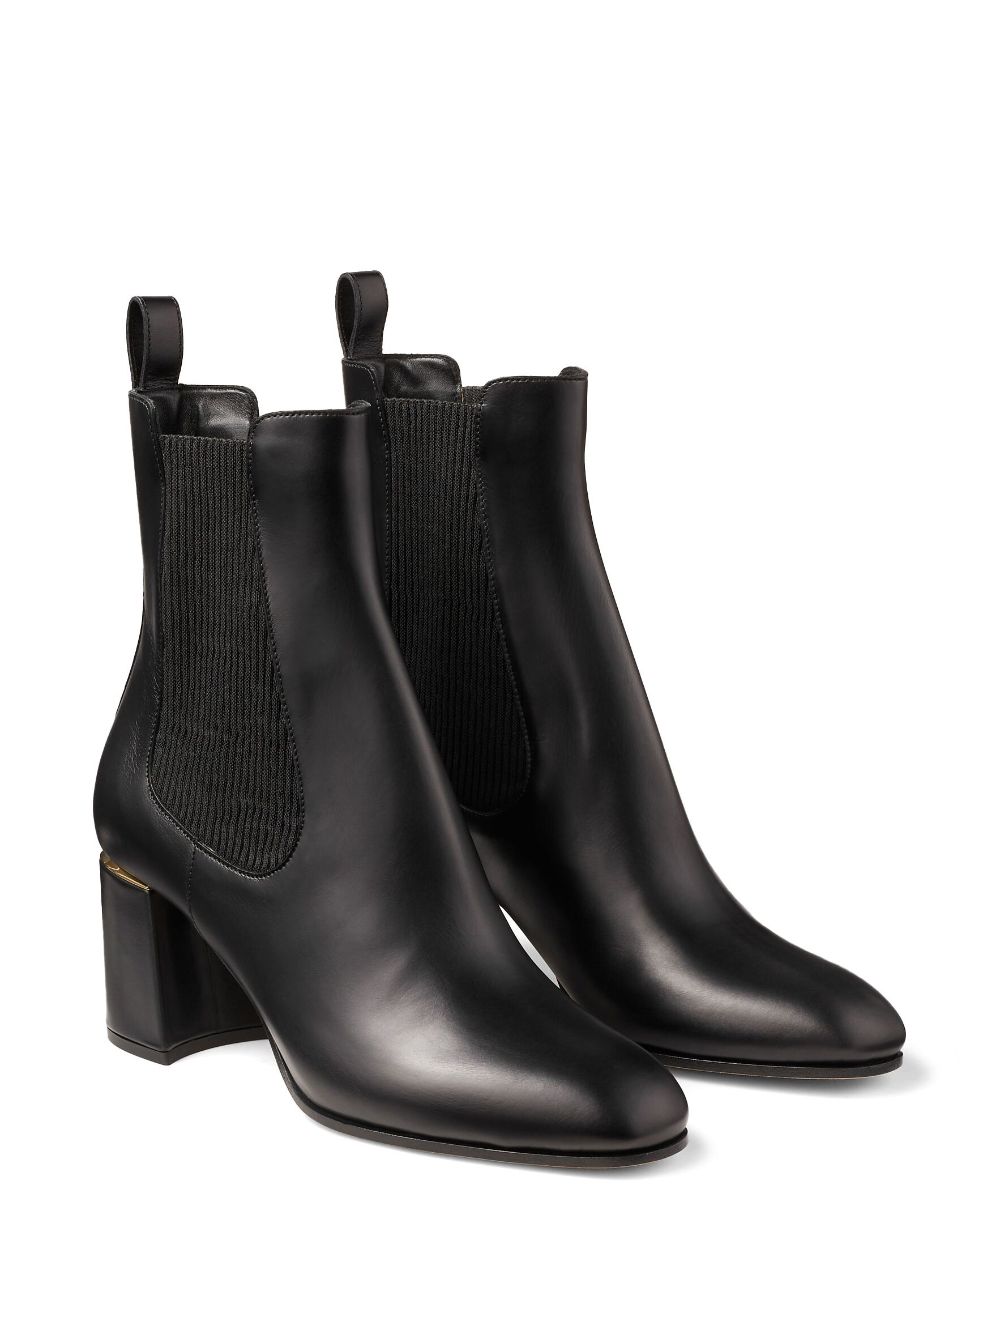 Jimmy Choo Thessaly 65mm Leather Boots - Farfetch